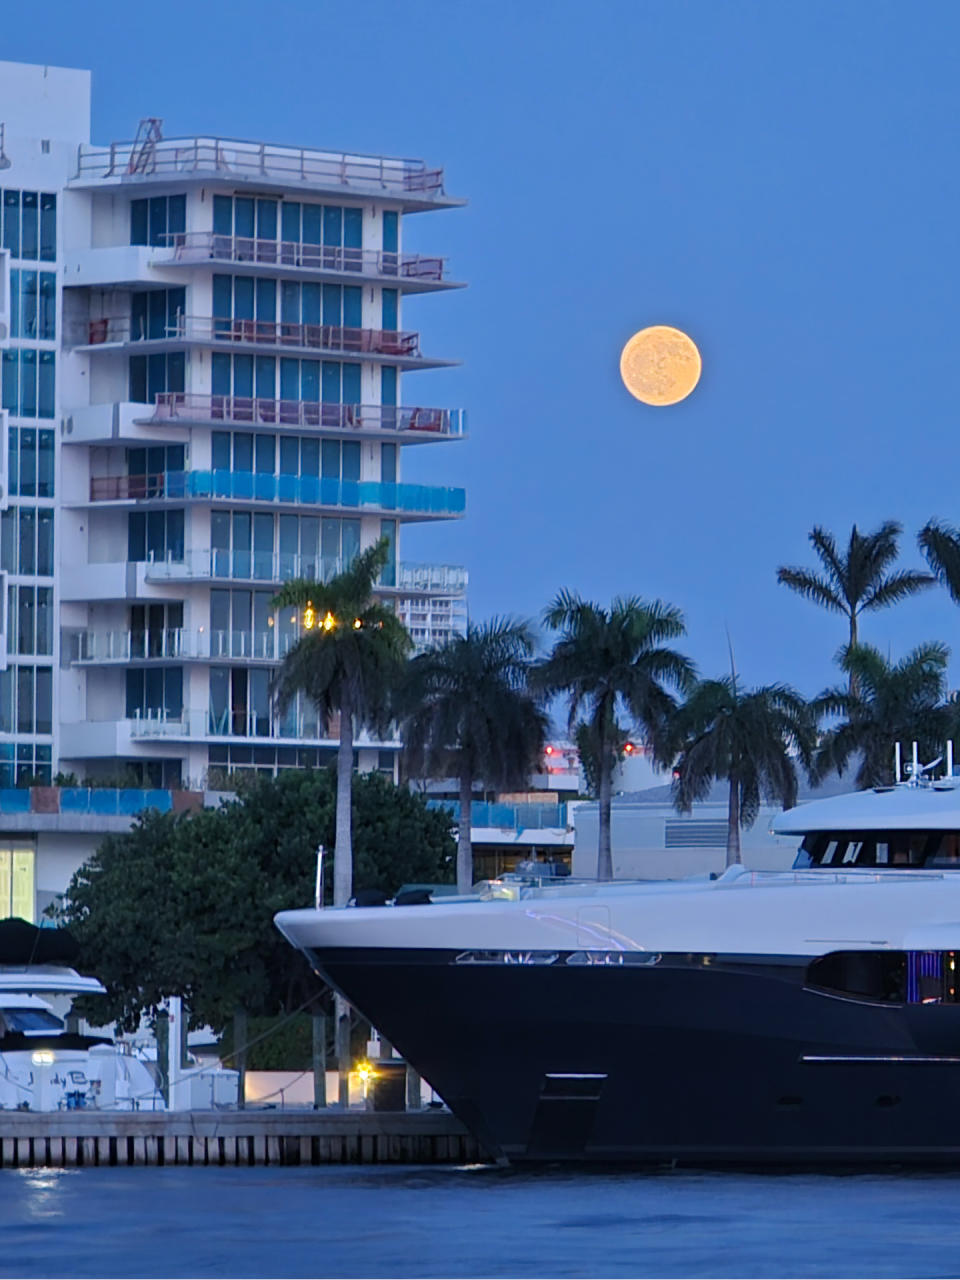 full moon shines in the upper right corner of the image against a deep blue sky. there is a building to the left of the moon and palm trees below with the front of a boat visible in the foreground of the image and water below.